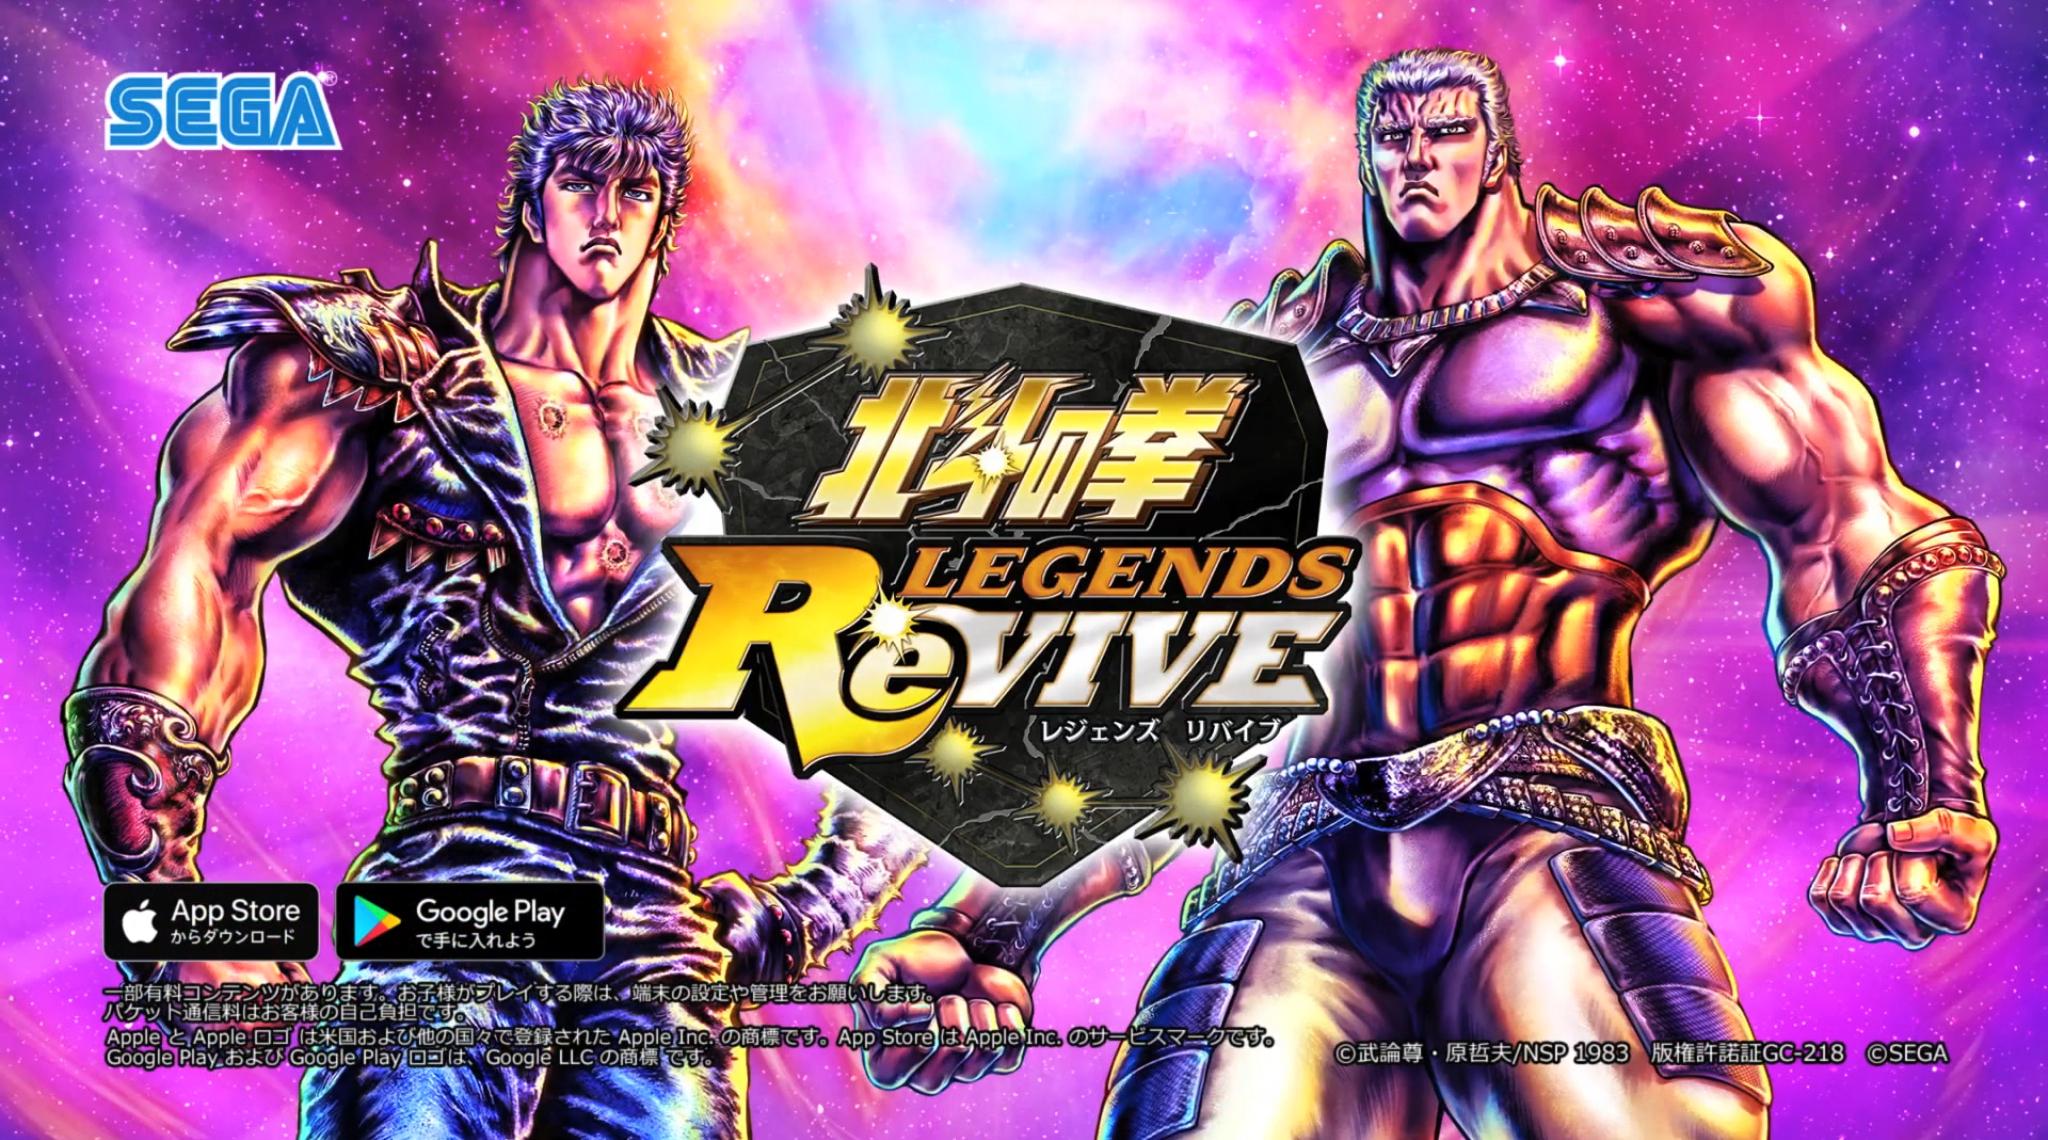 Fist Of The North Star Legends Revive From Sega Is Now Available On The App Store And Google Play For Free Toucharcade